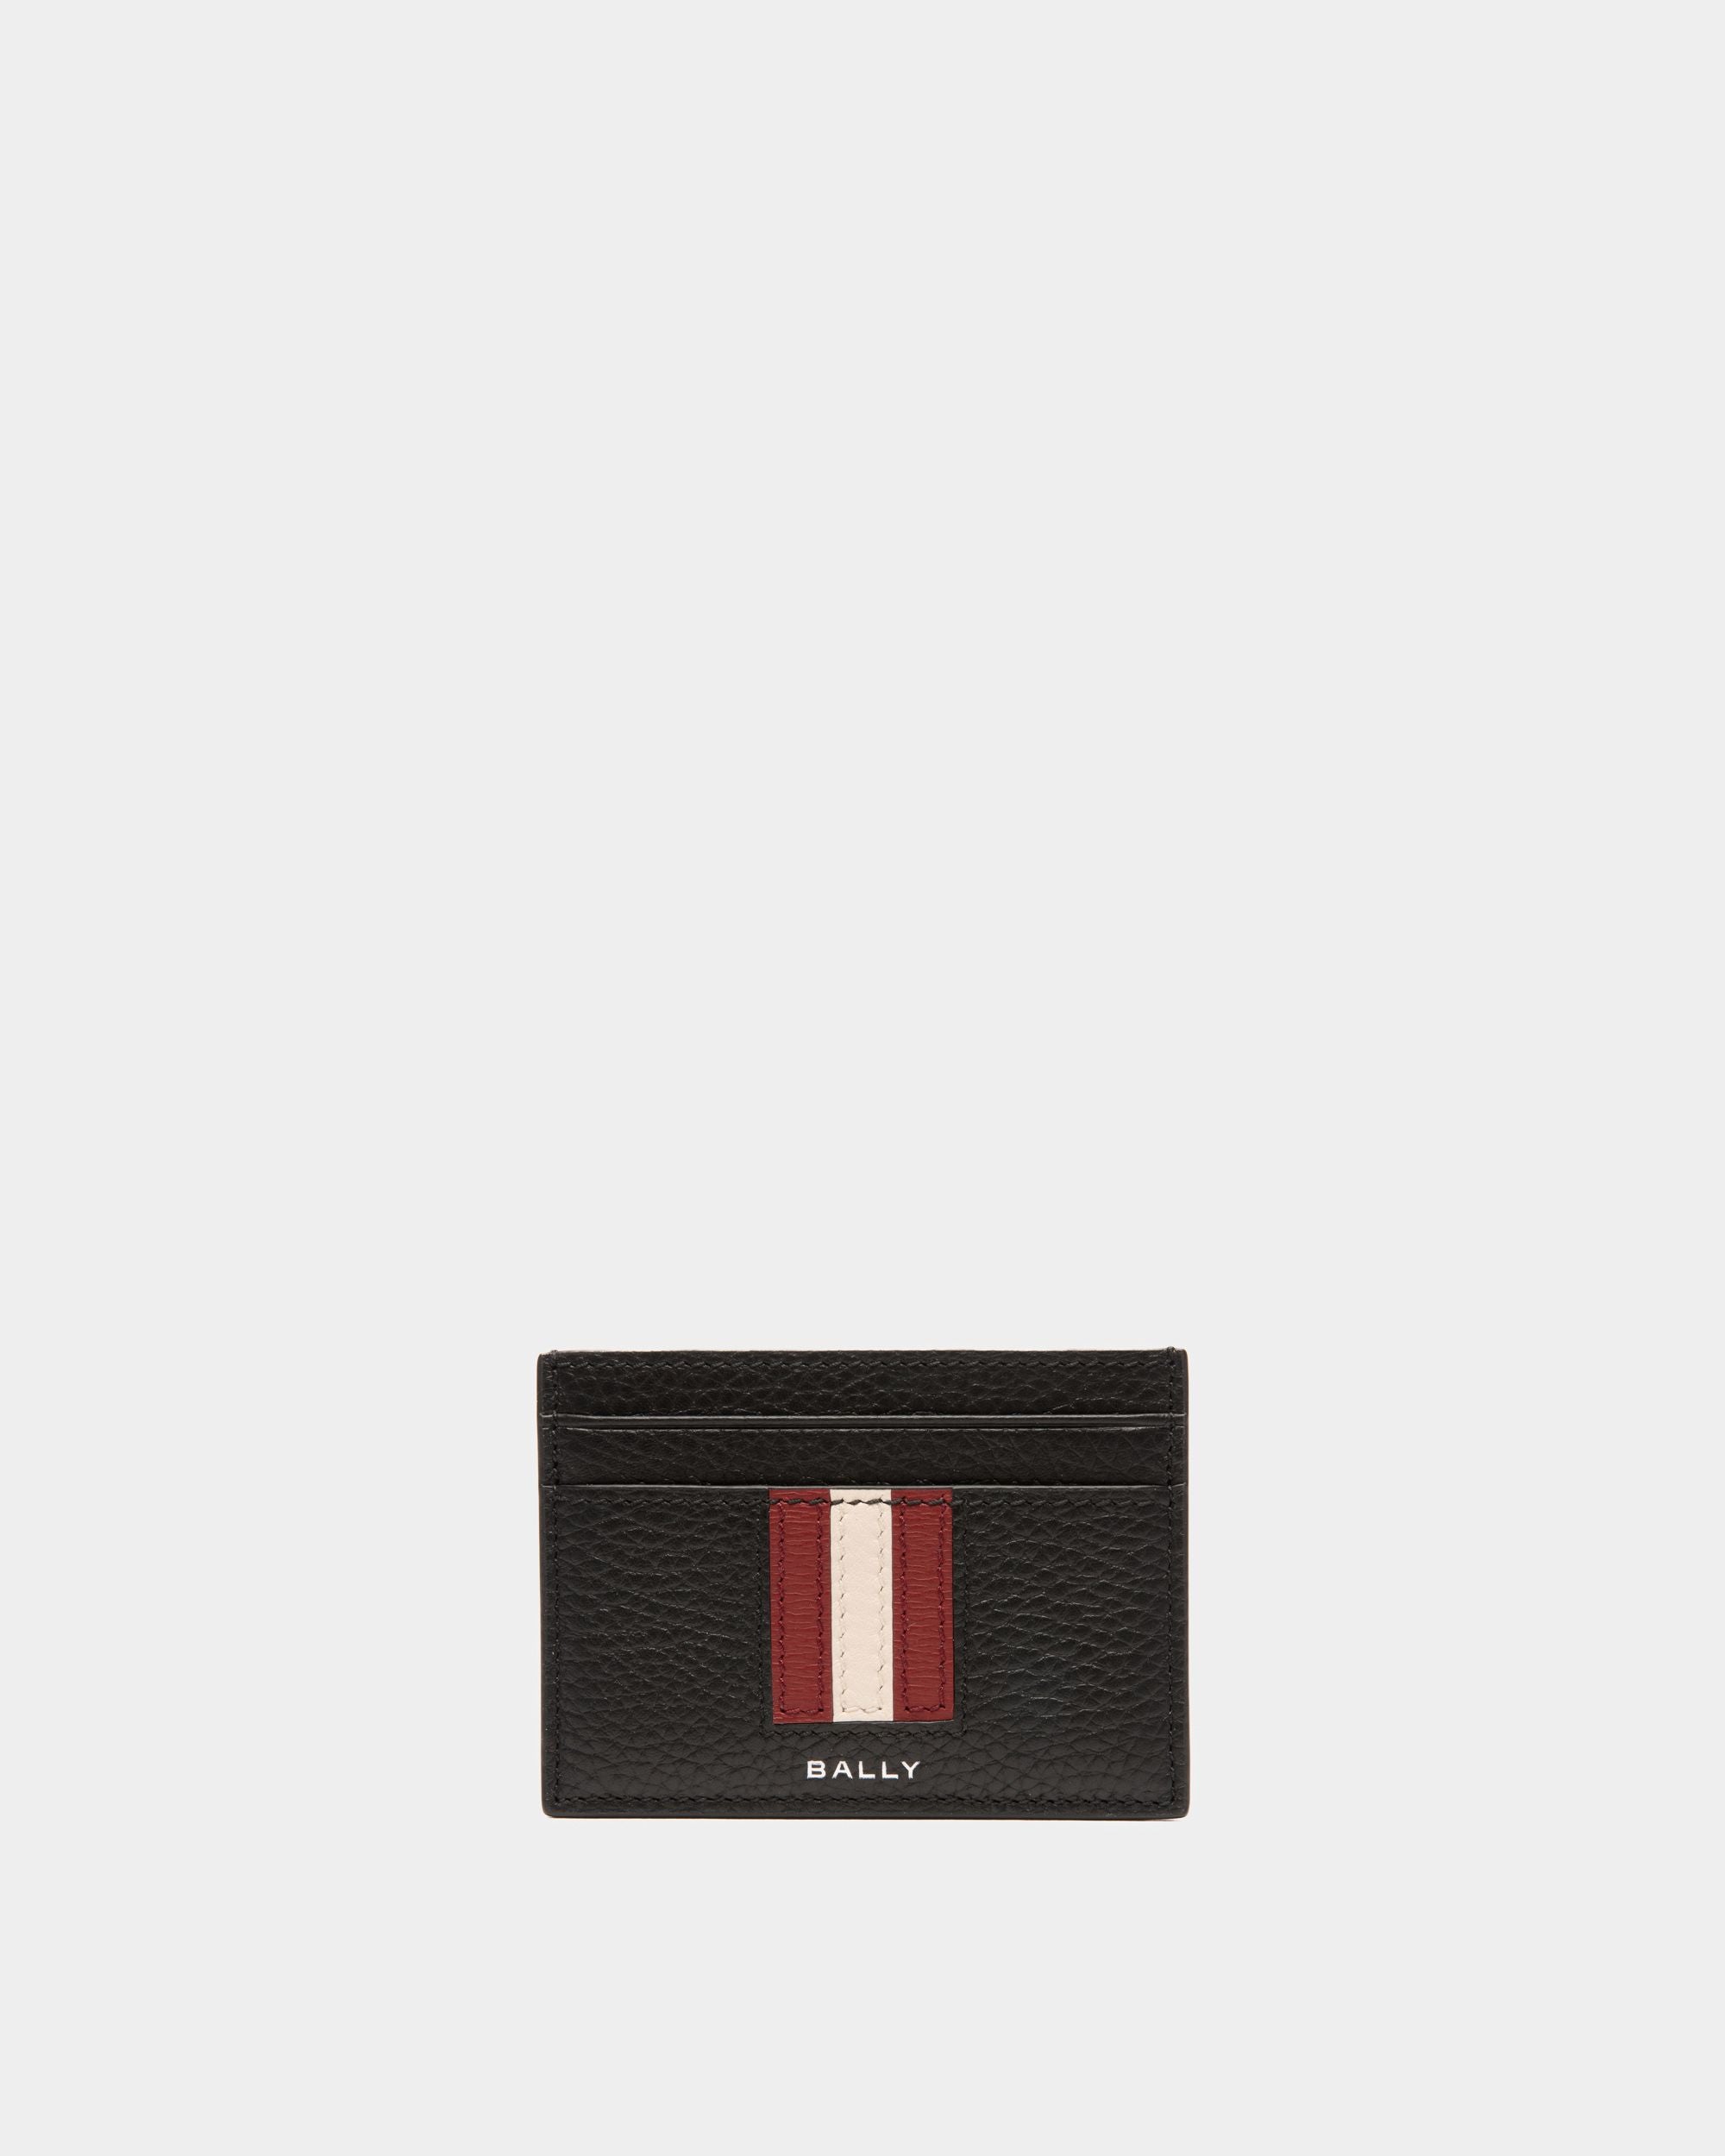 Ribbon | Men's Card Holder in Black Grained Leather | Bally | Still Life Front